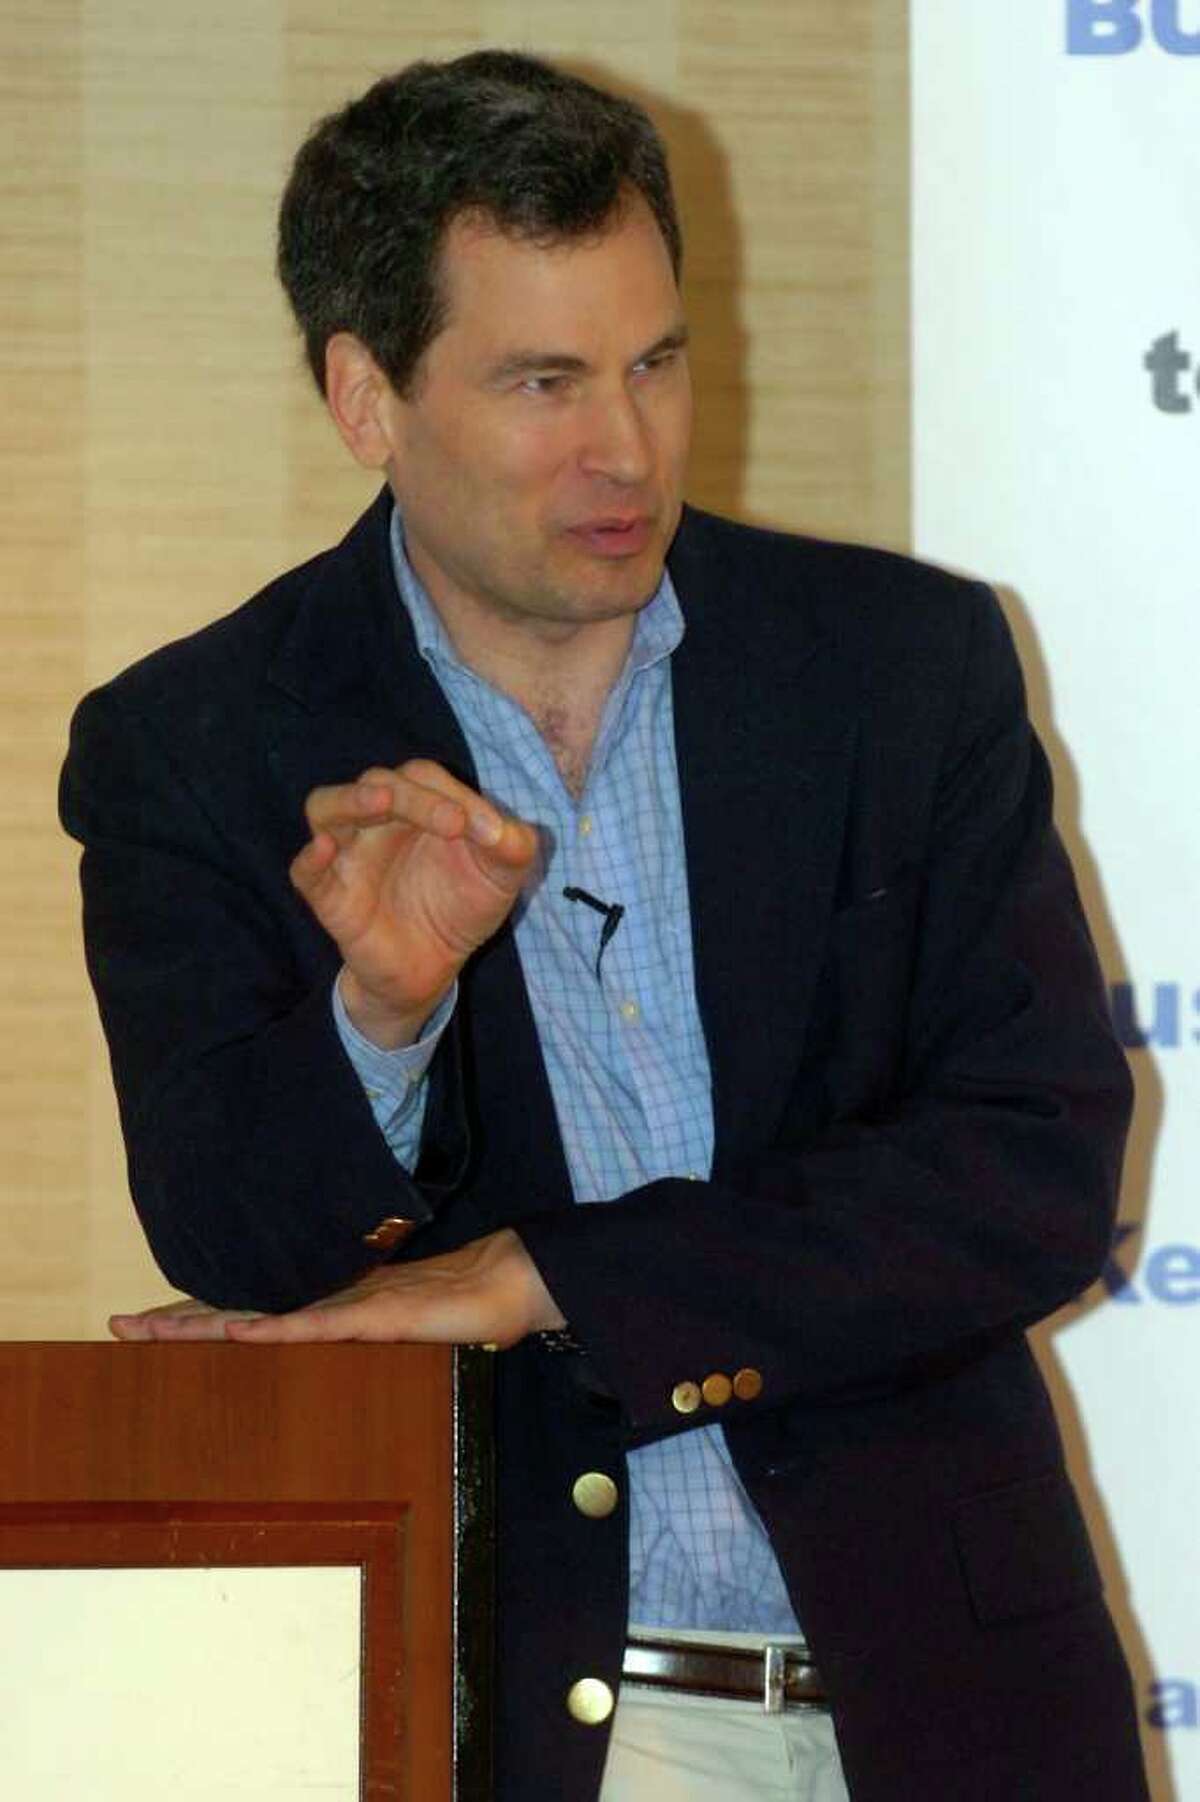 David Pogue, the New York Times technology columnist and CBS News correspondent, speaks at the Technology Today Business Forum at the Courtyard by Marriott in Shelton, Conn. Thursday, May 19th 2011. Pogue and his wife have been charged with disorderly conduct following a domestic dispute Monday at their Westport home that police said turned physical.